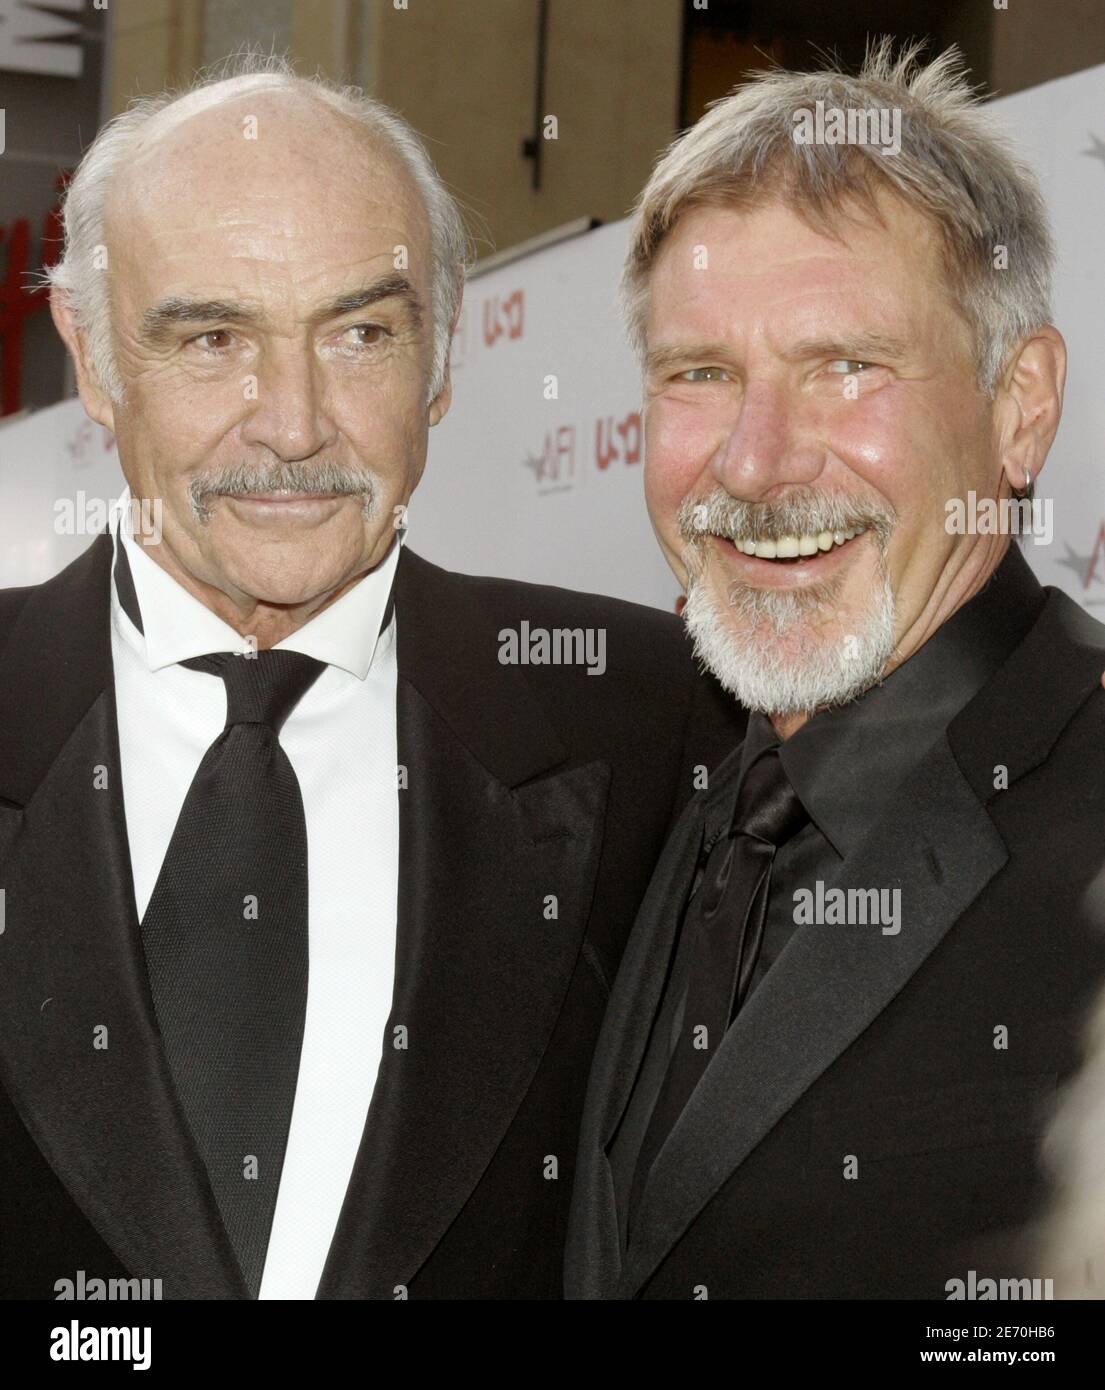 Actors Harrison Ford and Sean Connery (L) pose as they arrive at the American Film Institute's 'AFI Life Achievement Award, A Tribute to Sir Sean Connery' taping in Hollywood June 8, 2006. [The show that honored Connery's long career will be telecast on the USA Network cable channel on June 21.] Stock Photo